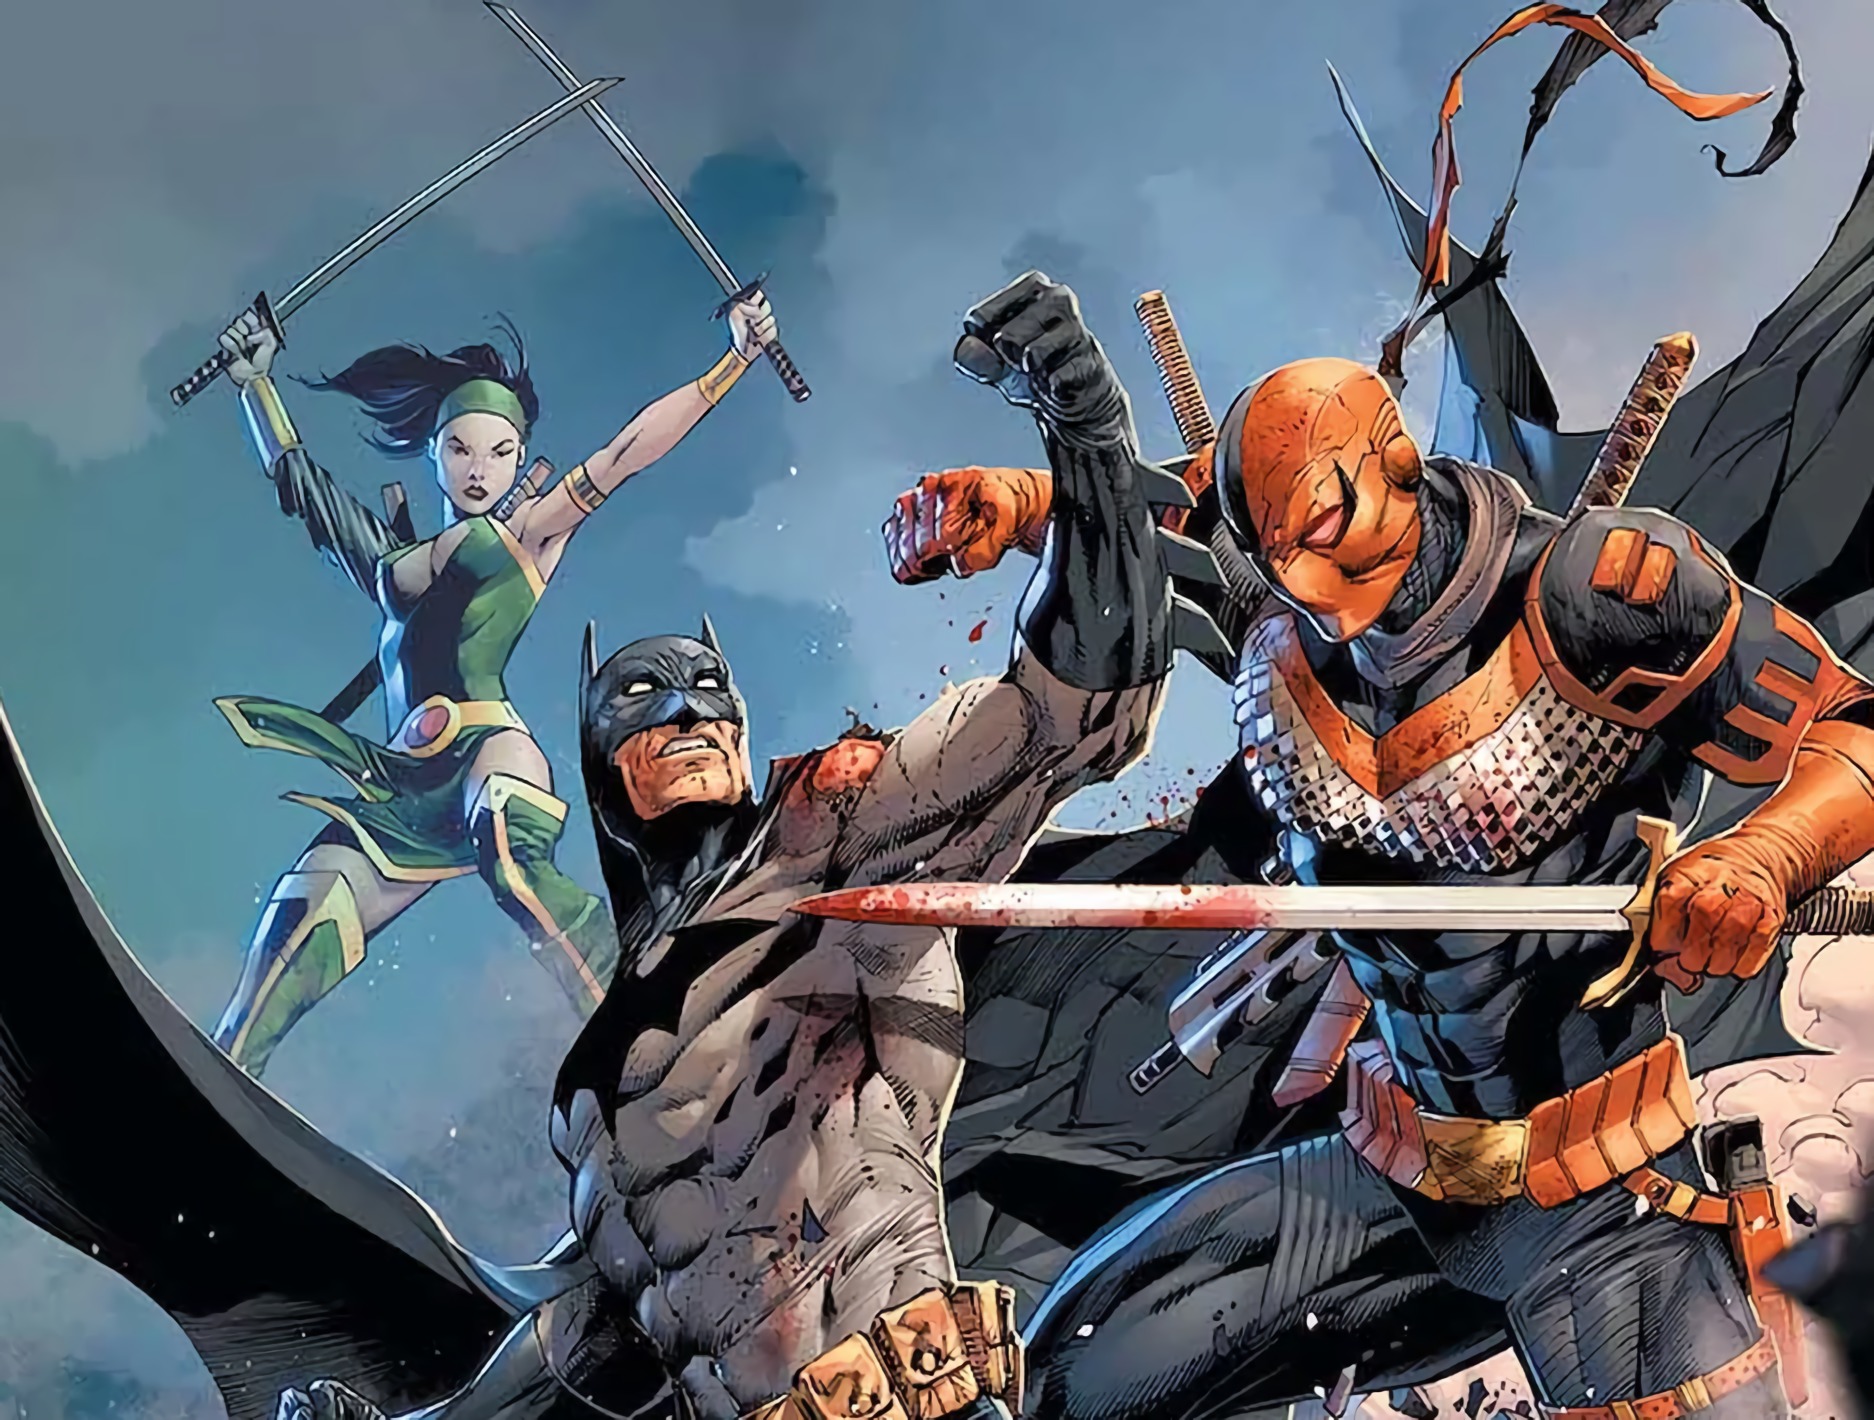 First look at new Batman creative team James Tynion and Tony S. Daniel's run reveals Deathstroke and Cheshire